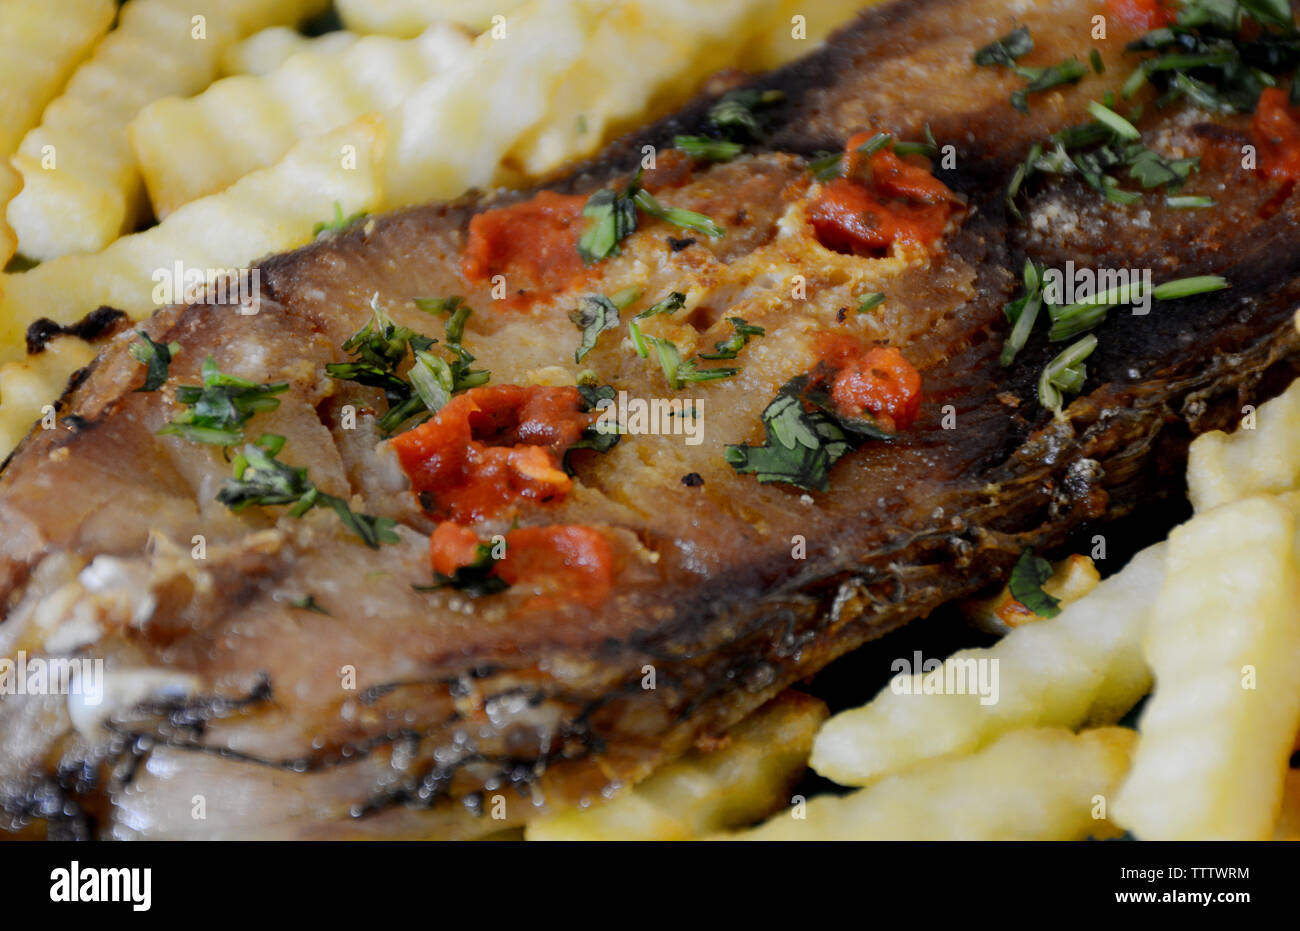 Beautiful Piece of Fried Fish with French Fries and Cilantro Stock Photo